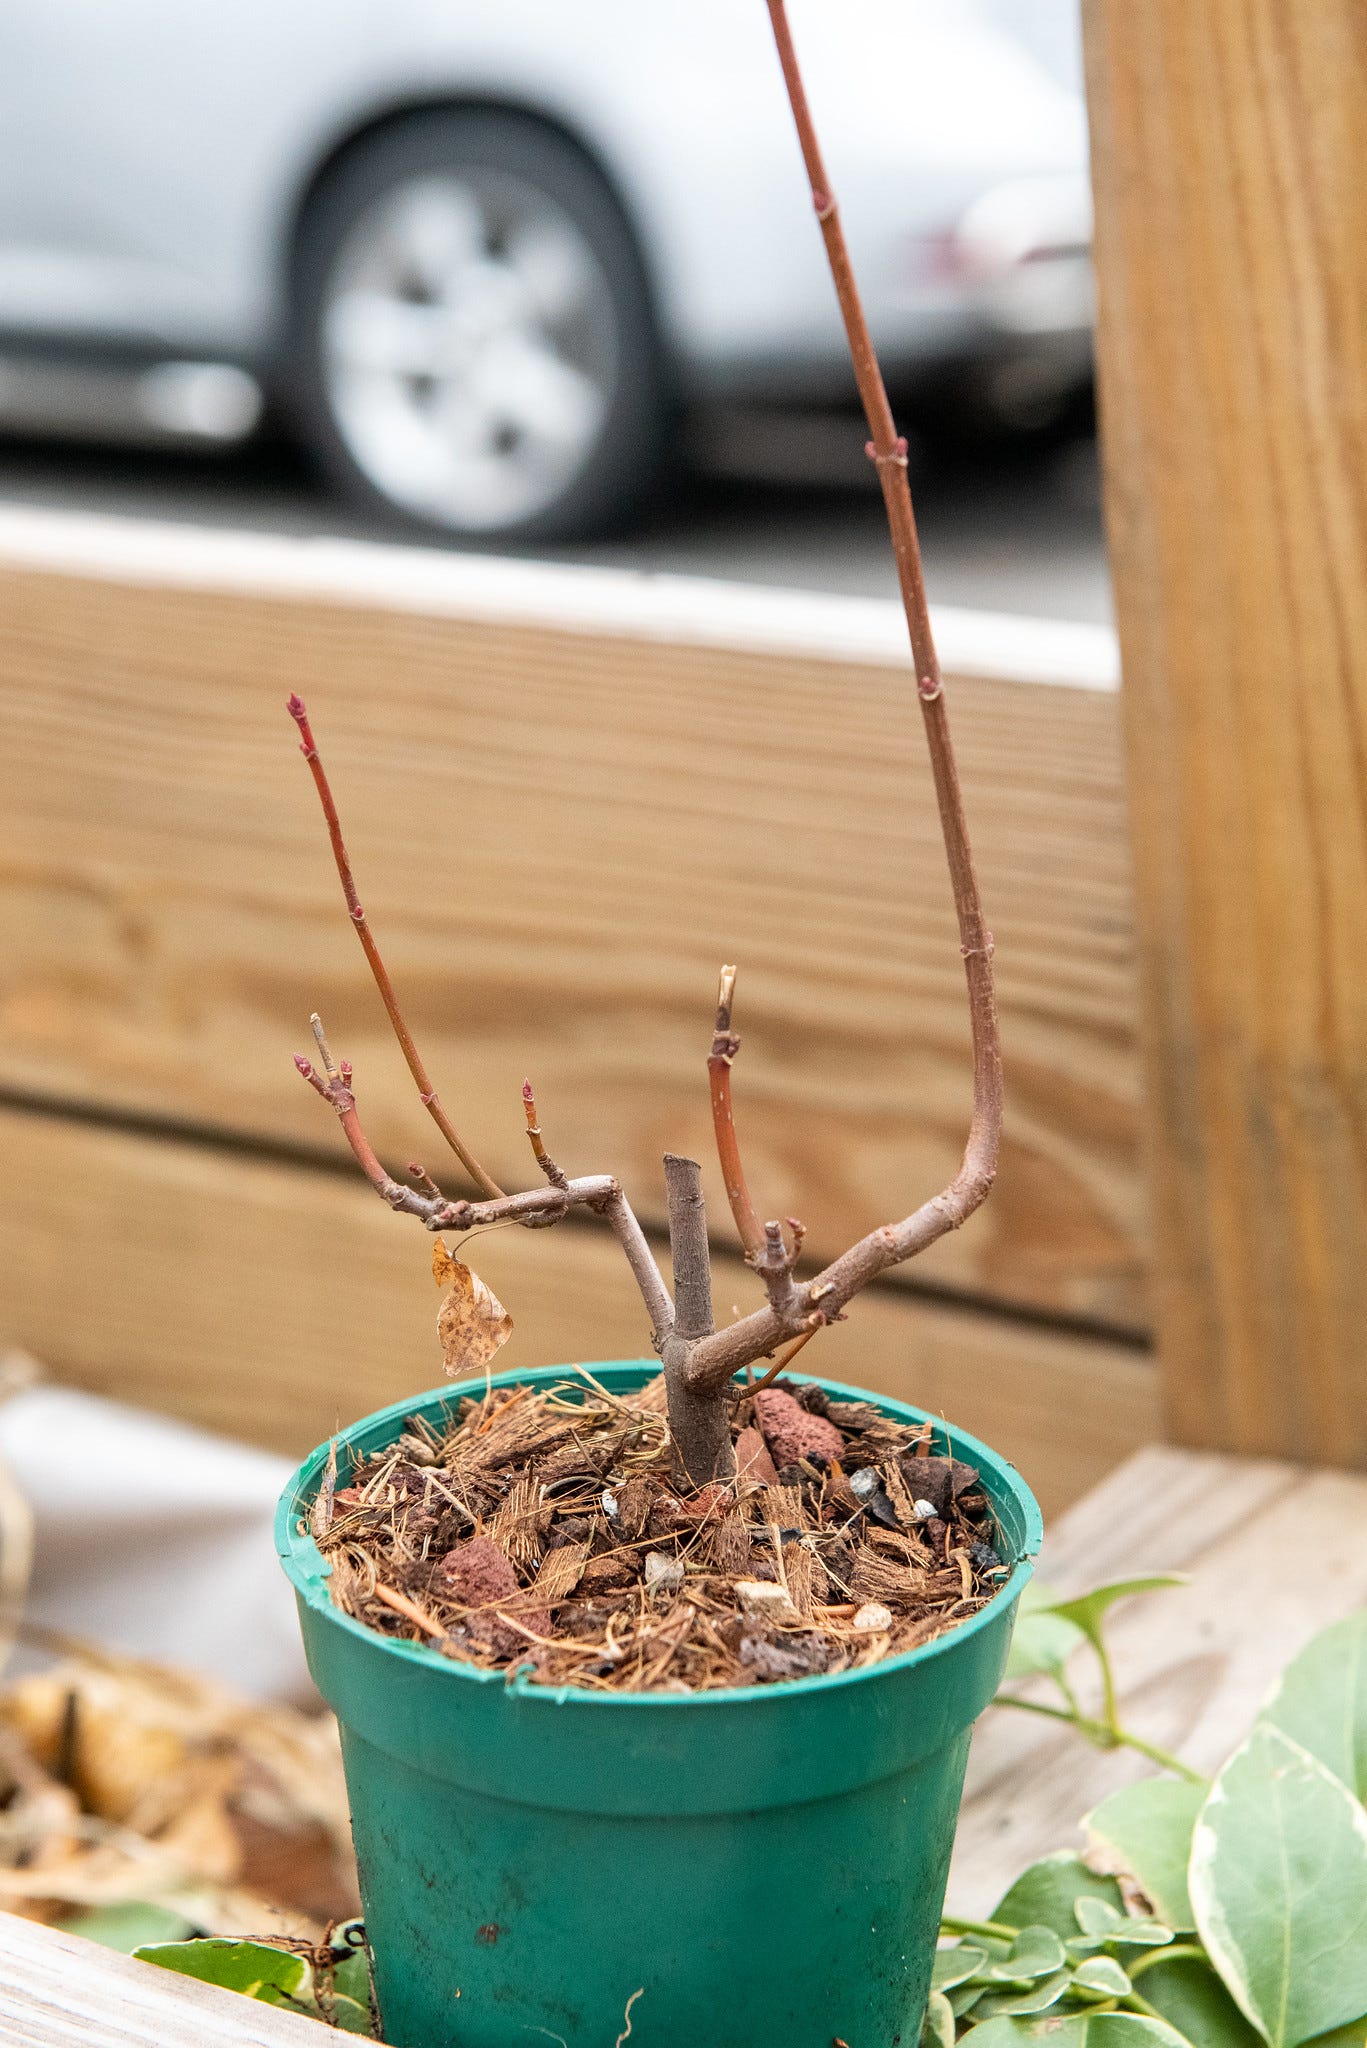 ID: Very small red maple pre bonsai in 4 inch pot outdoors with one very tall branch pointing up.